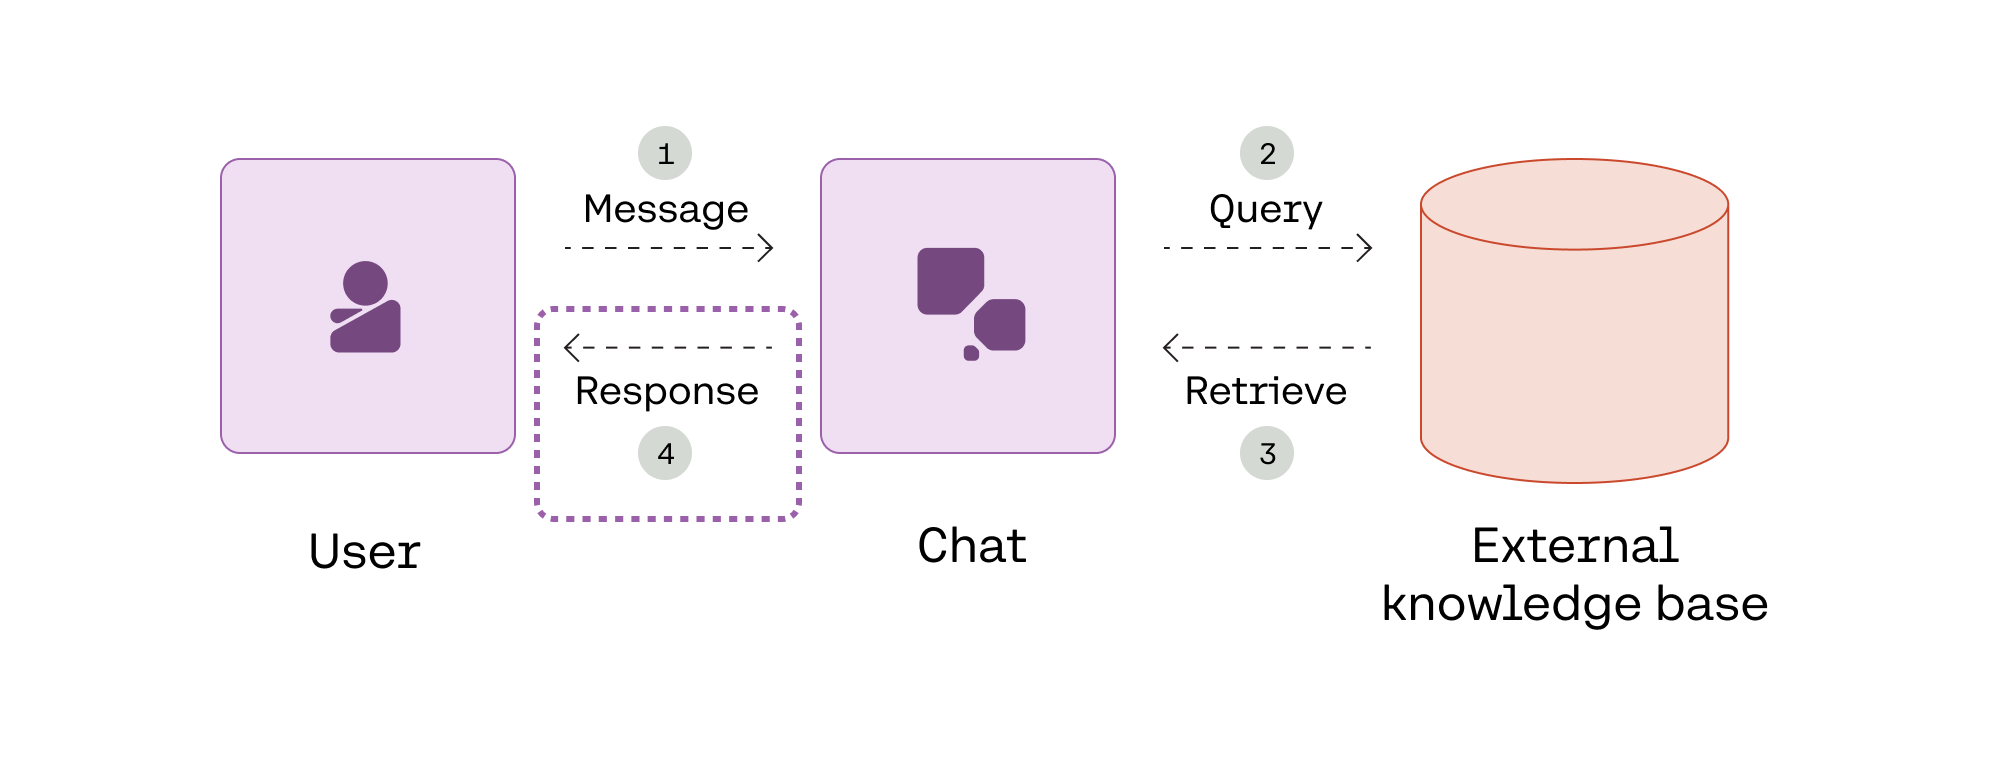 The augmented generation part of RAG: The Chat endpoint uses the retrieved information to provide a grounded response